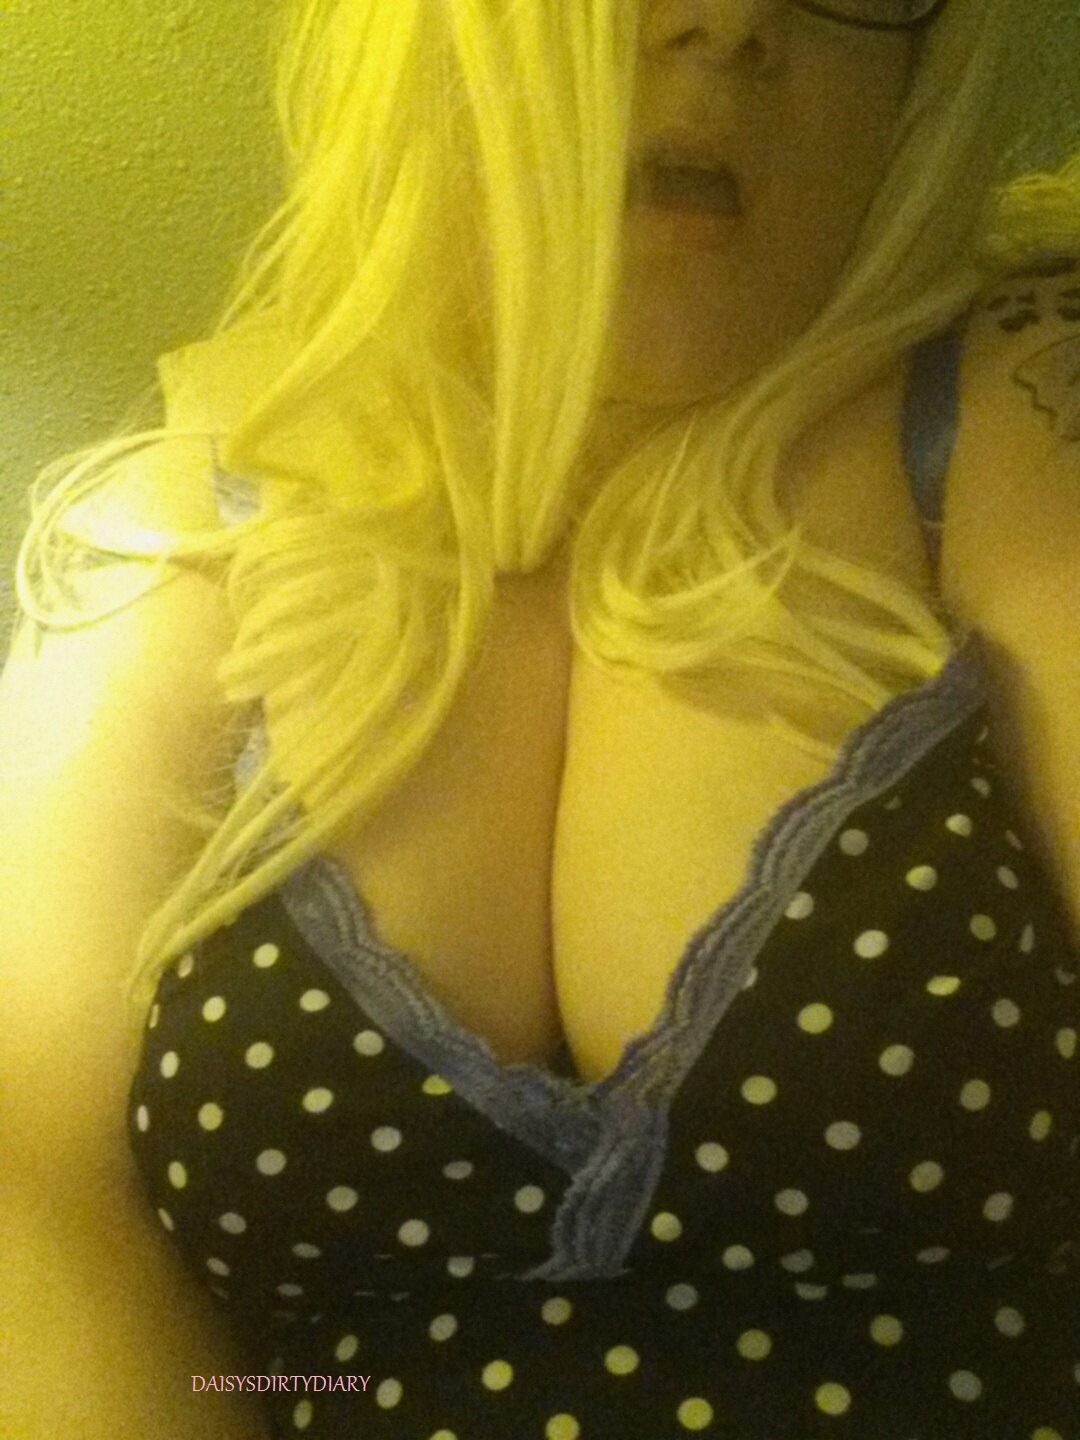 daisysdirtydiary:  How’s about some big fat tits for Topless Tuesday? ;)